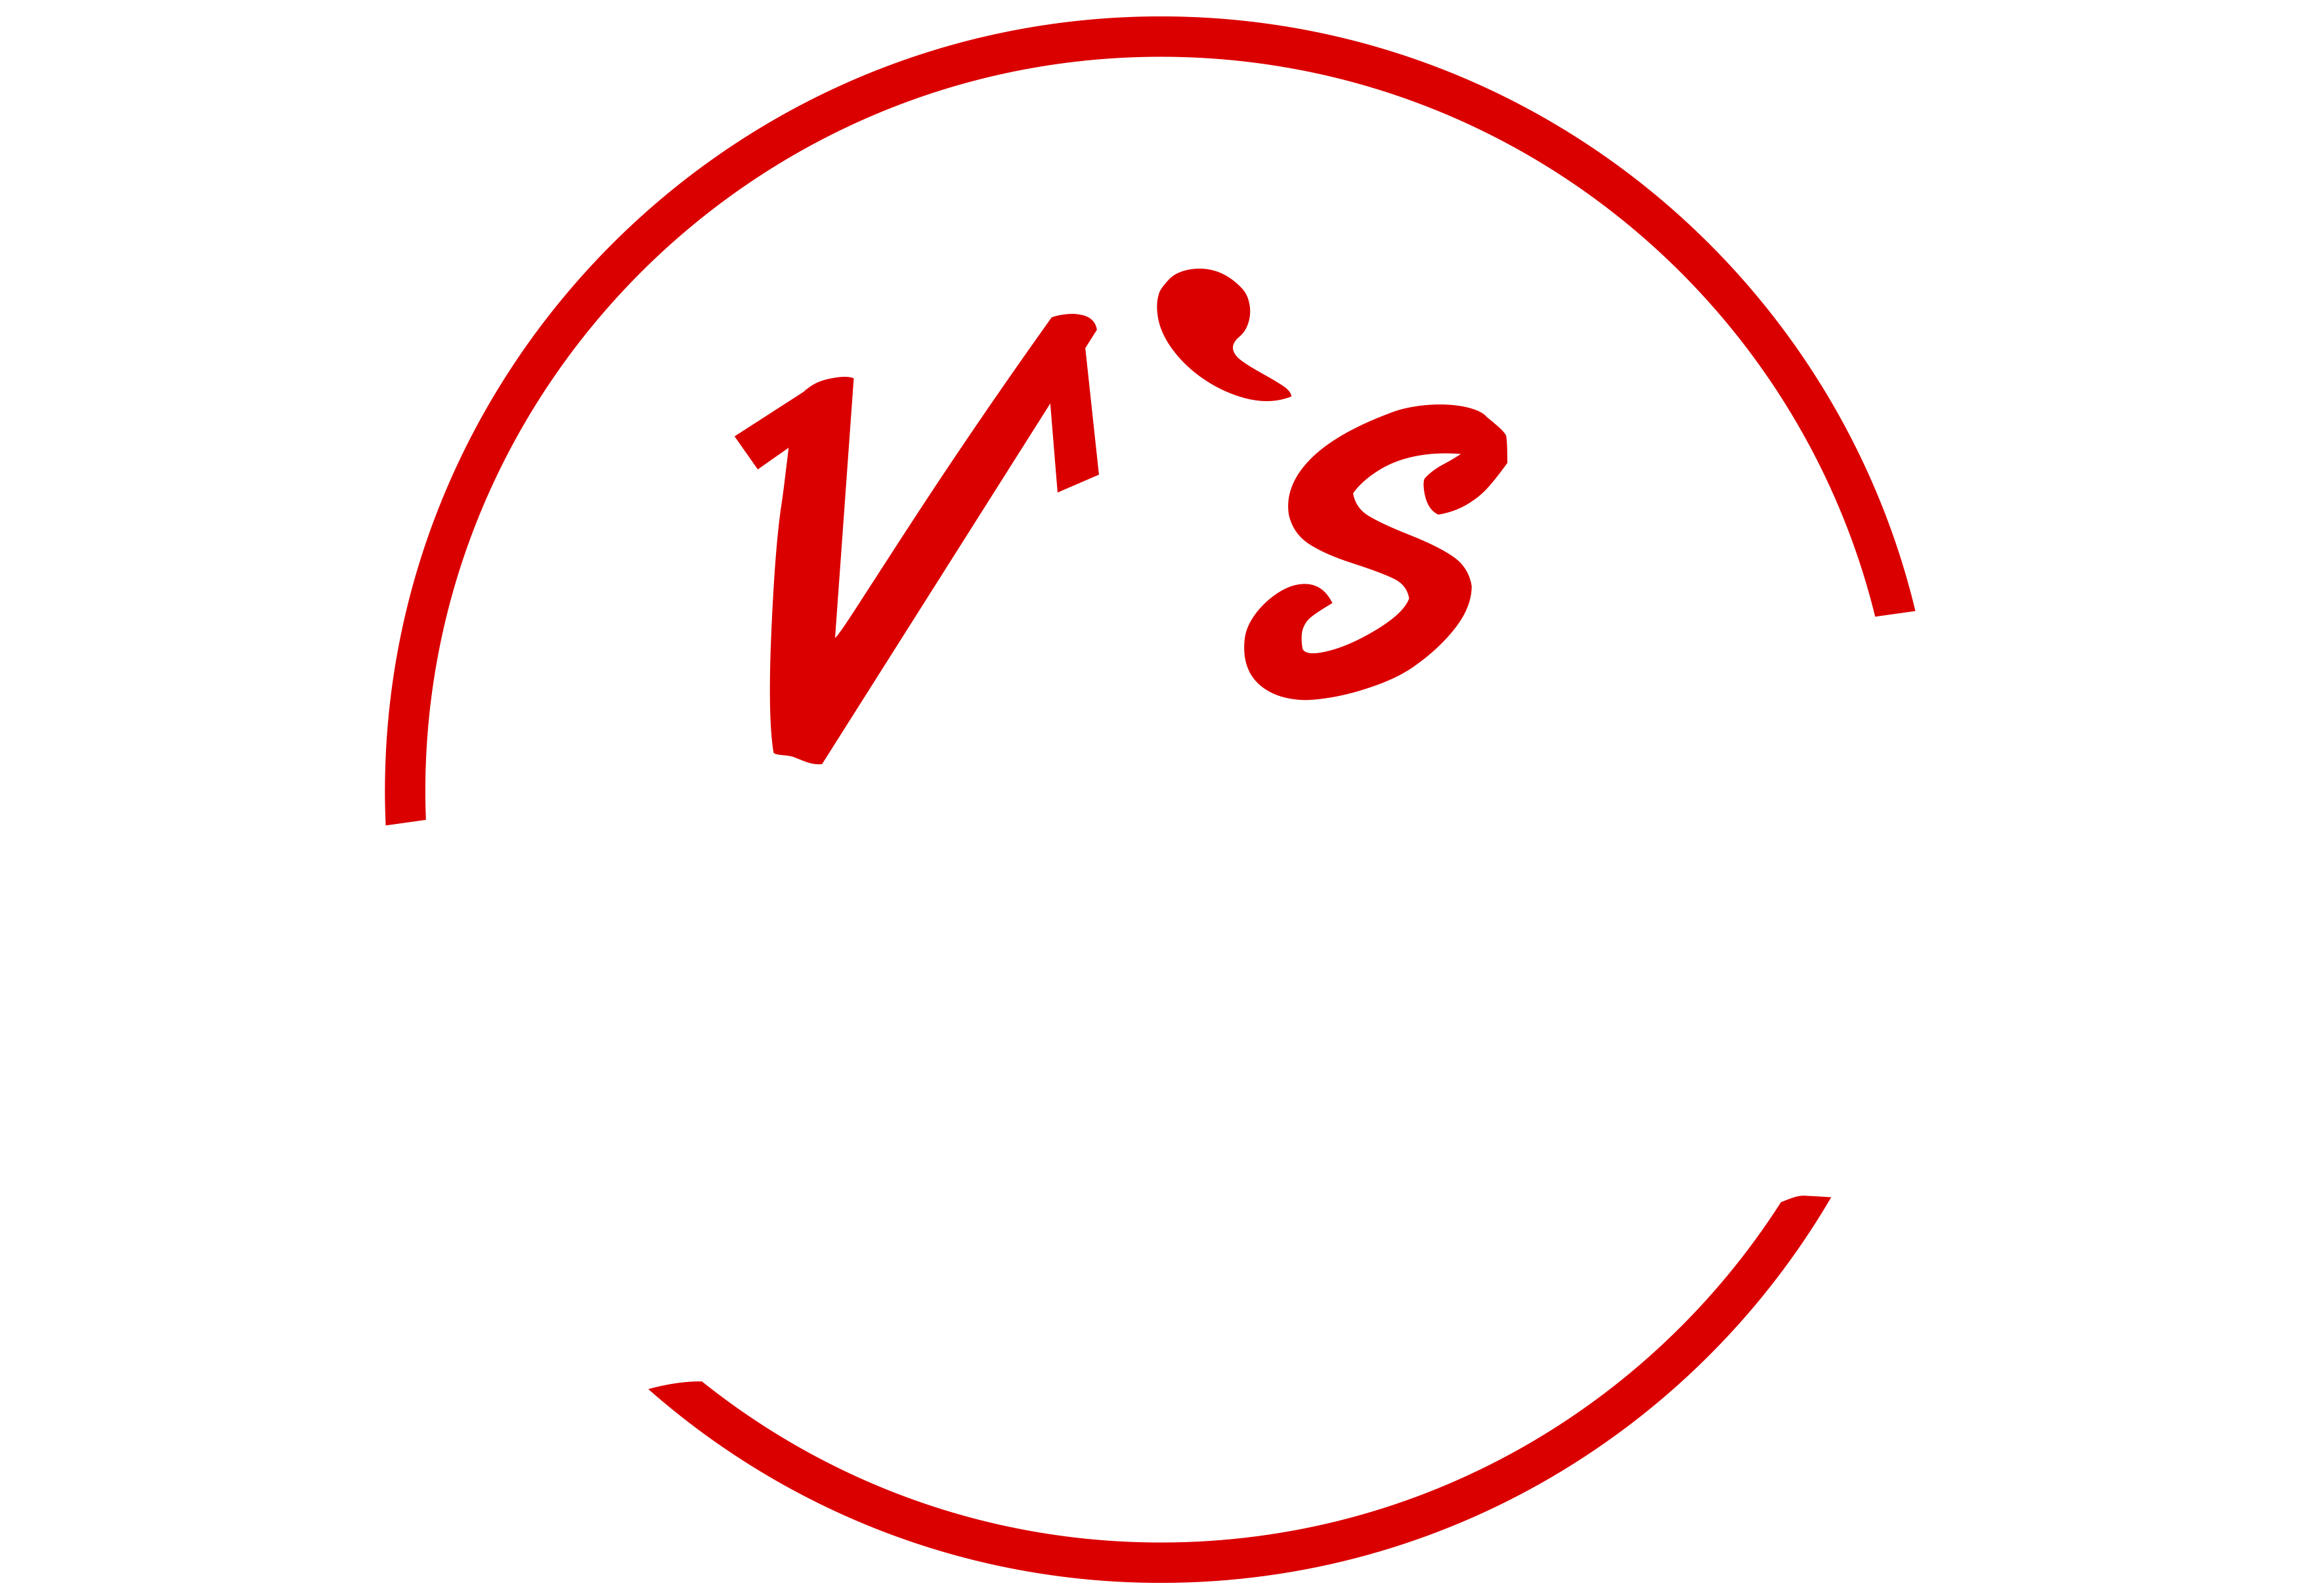 V's Reviewers